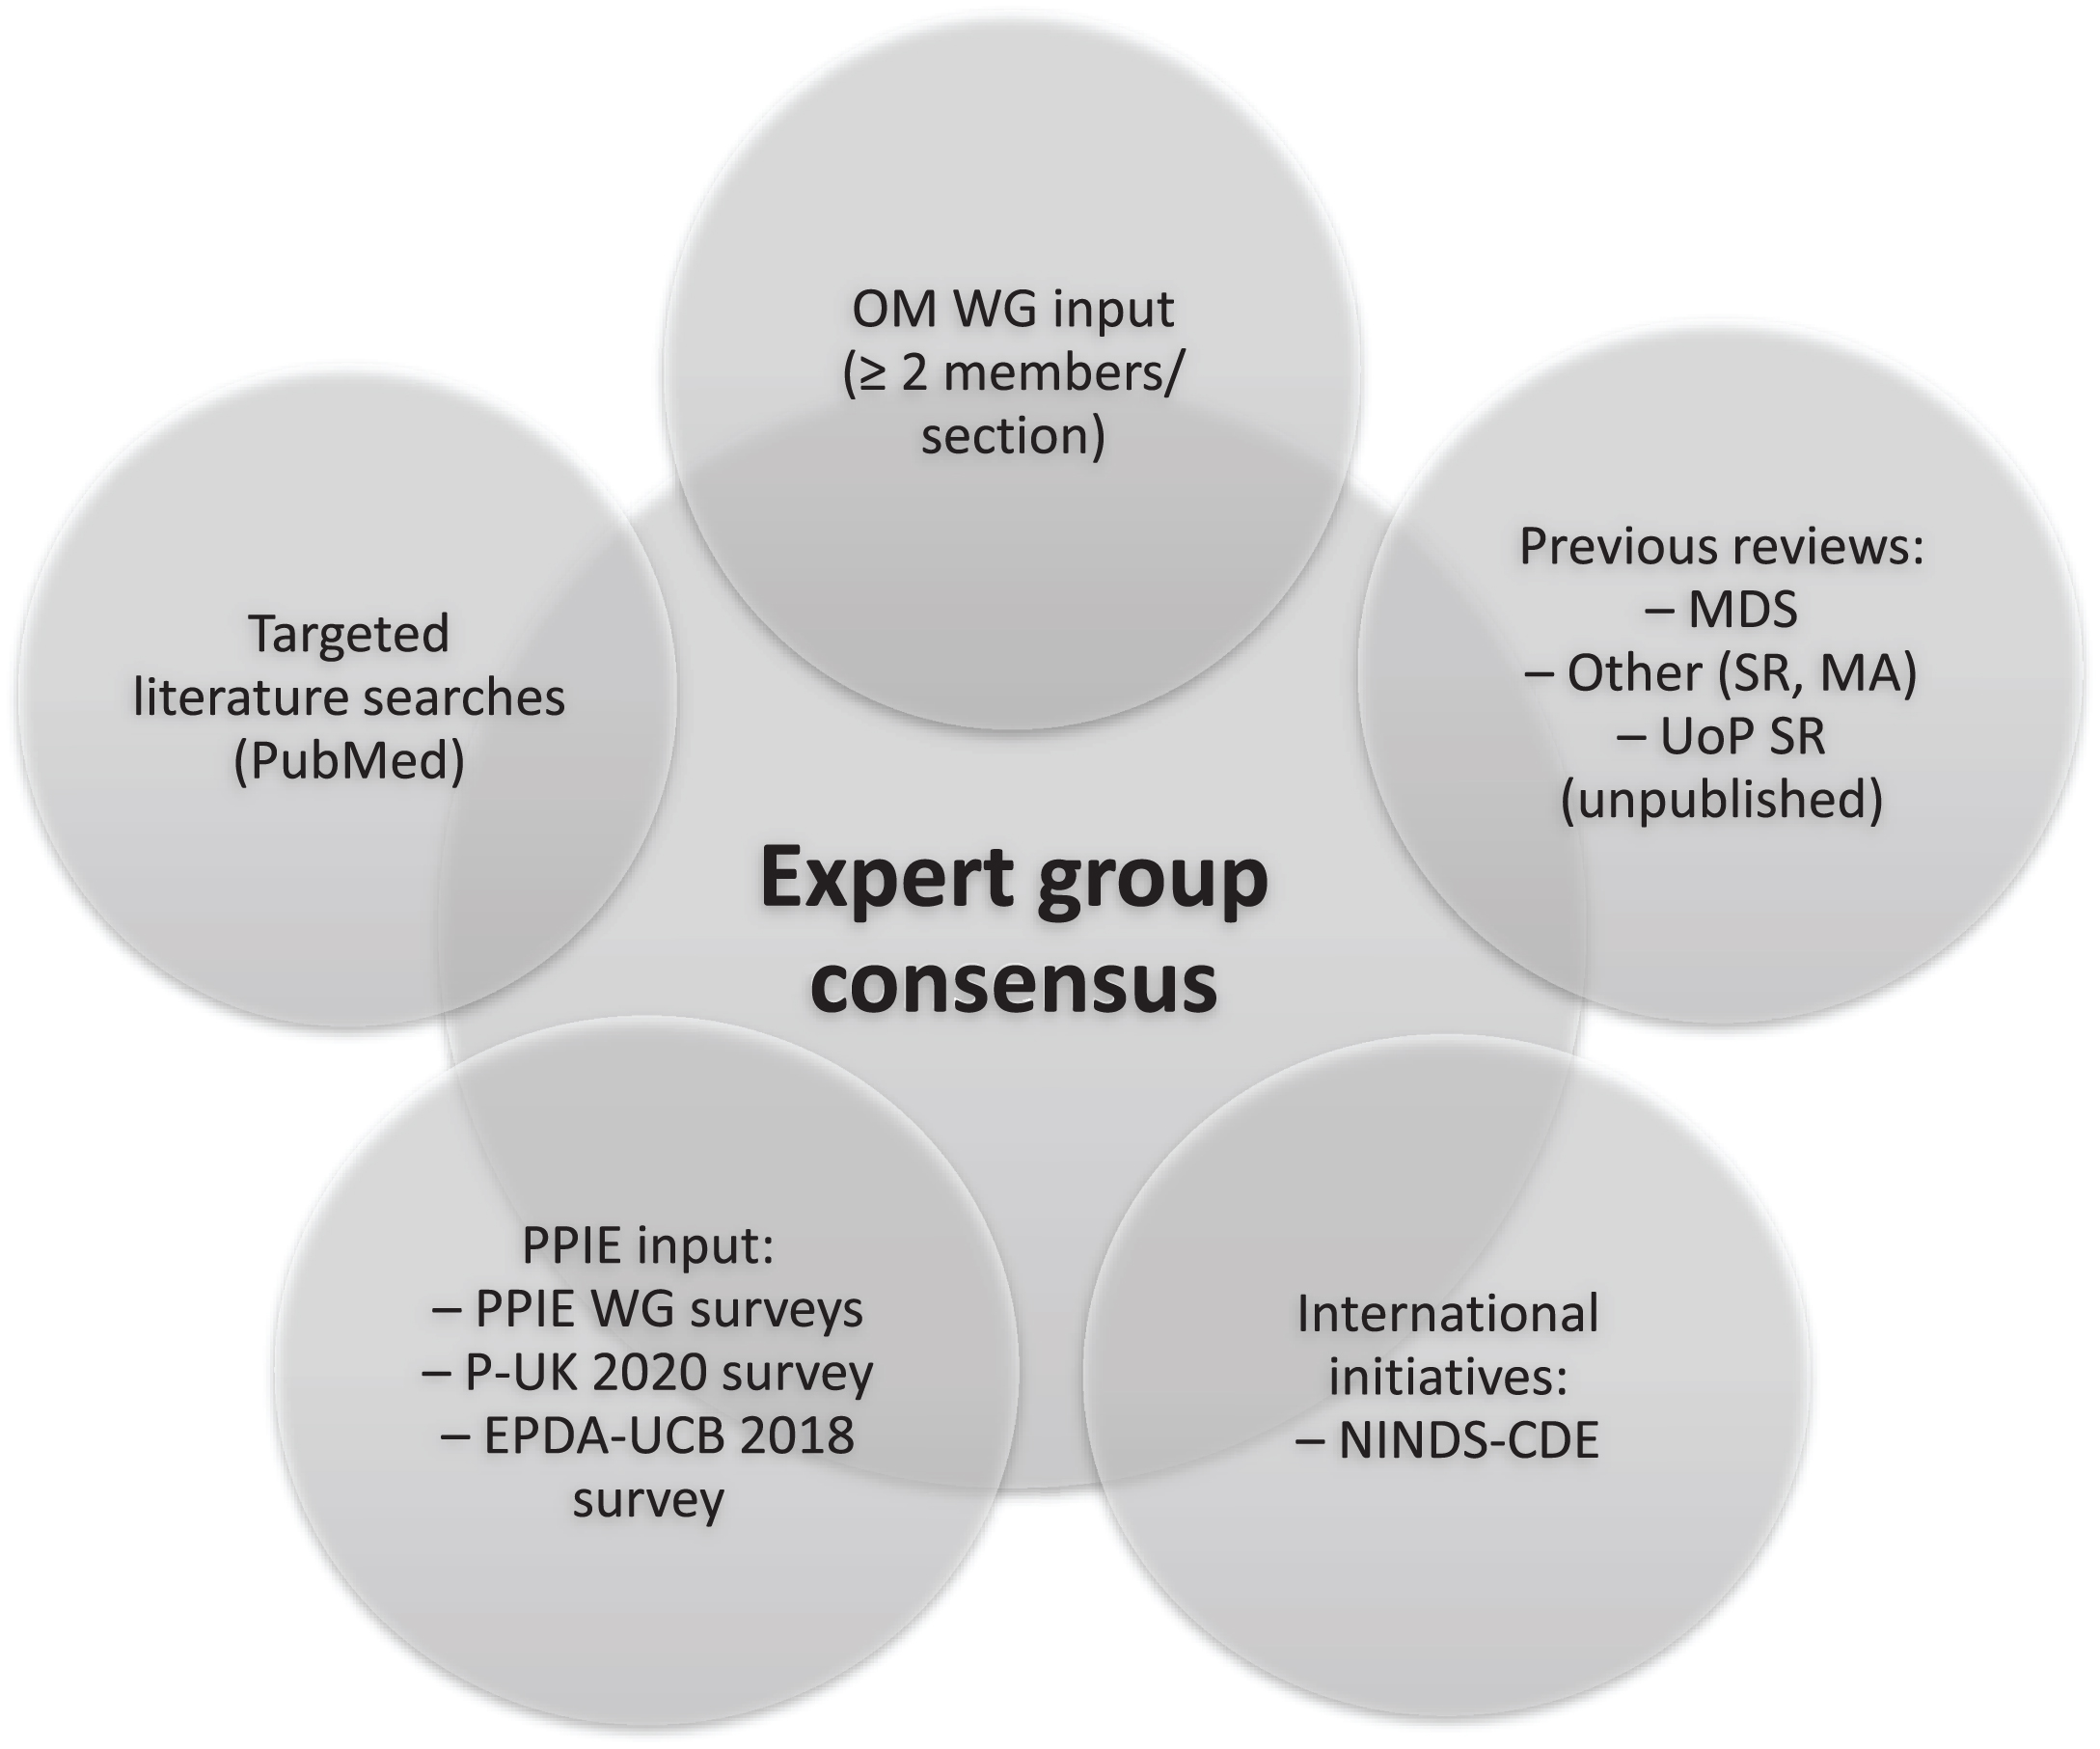 Sources for consensus of outcome measures in disease-modifying trials in Parkinson’s disease. EPDA-UCB, European Parkinson’s Disease Association-UCB Pharma; MA, meta-analysis; MDS, Movement Disorders Society (critique and recommendation papers on different outcome measures); NINDS-CDE, National Institute of Neurological Disorders and Stroke Common Data Elements initiative; OM, Outcome Measures; P-UK, Parkinson’s UK; PPIE, Patient and Public Involvement and Engagement; SR, Systematic review; UoP, University of Plymouth; WG, Working Group.